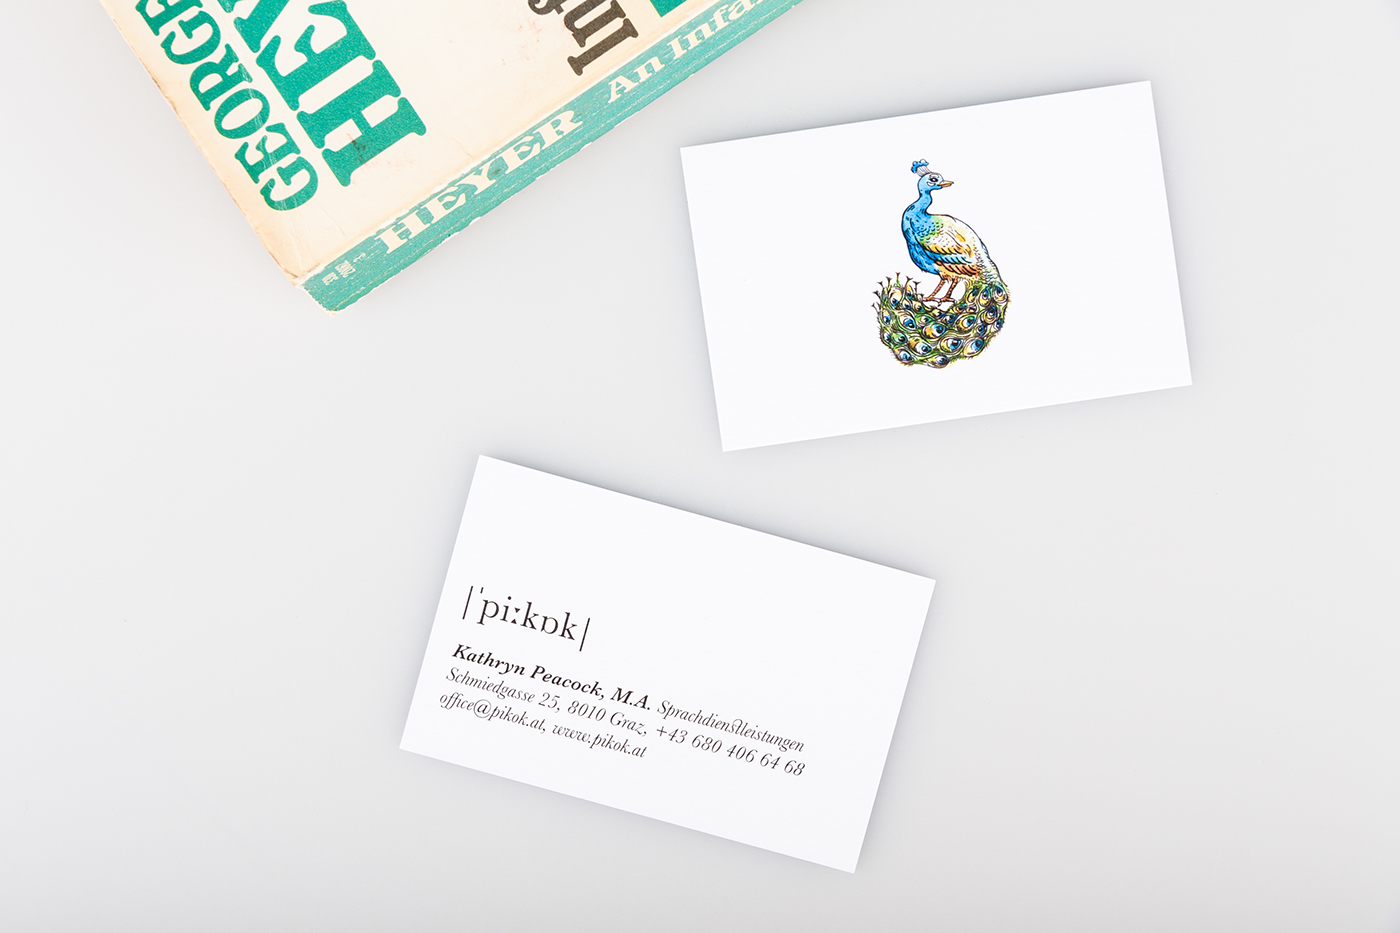 Corporate Design peacock books dictionary IPA logo Business Cards notepads bookmarks Baskerville